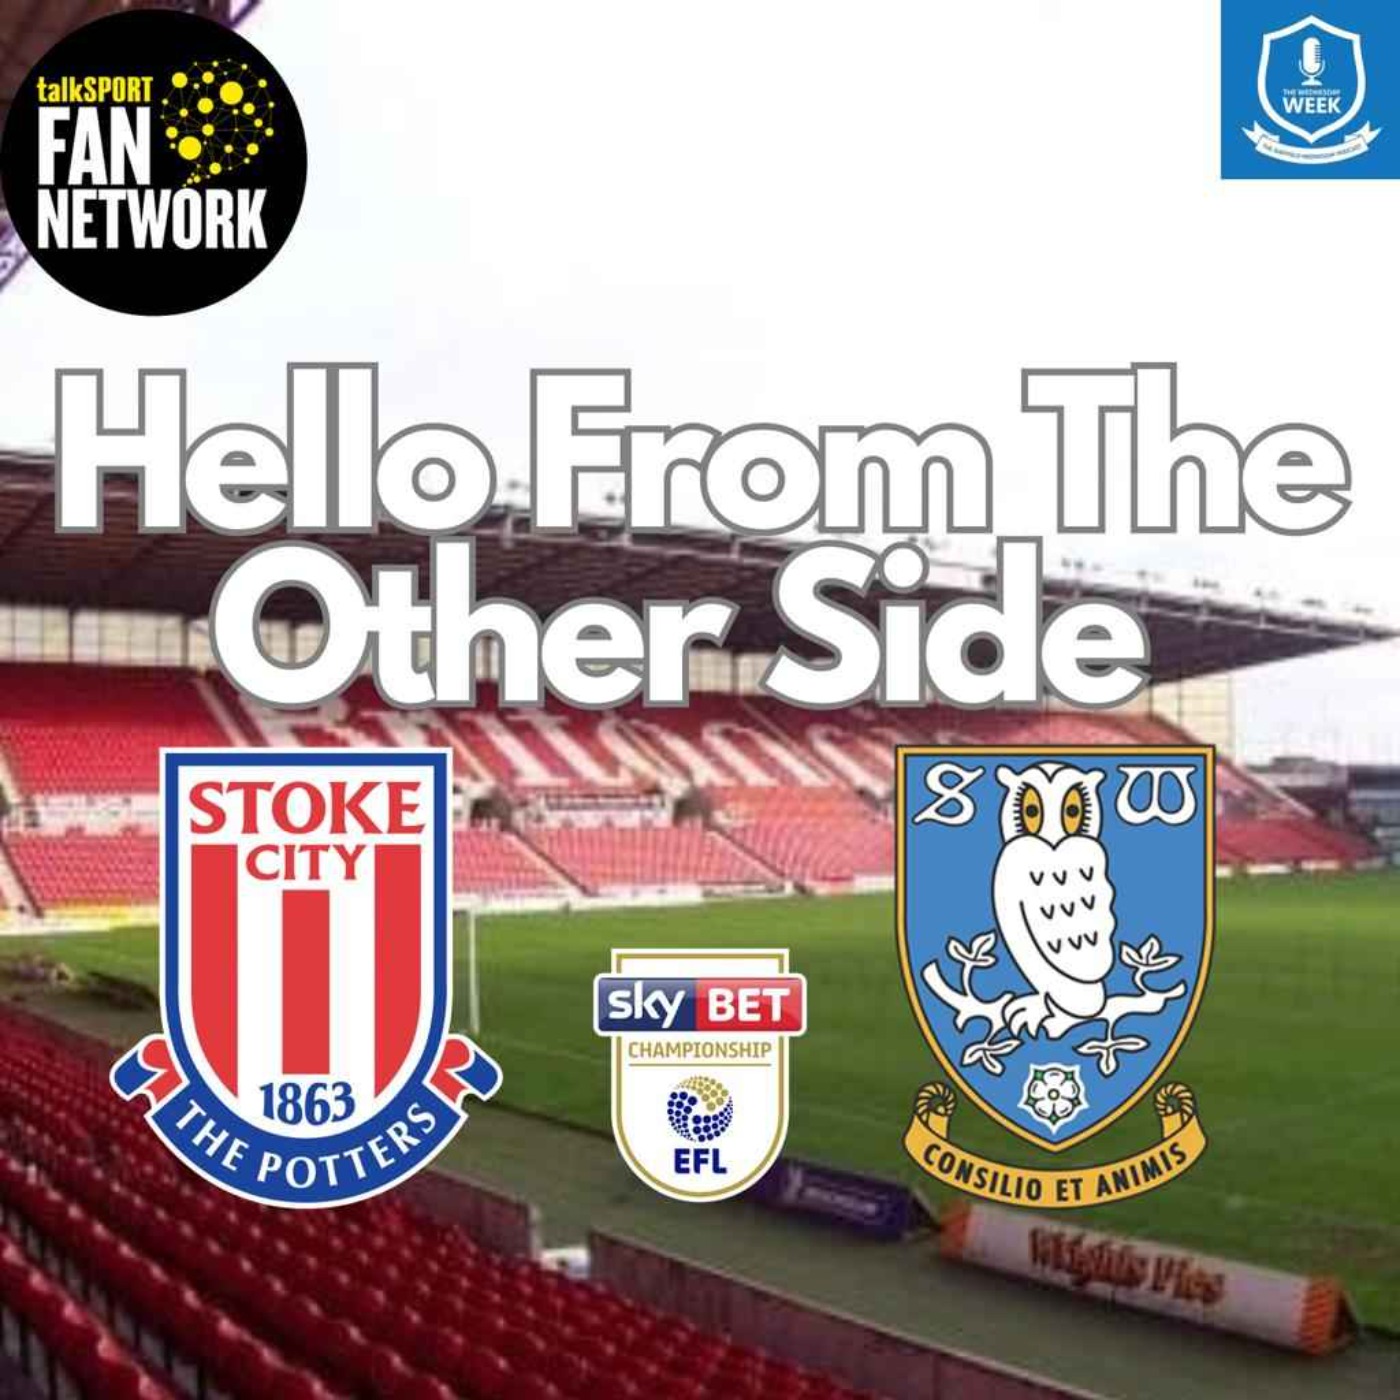 Hello From the Other Side - Stoke City